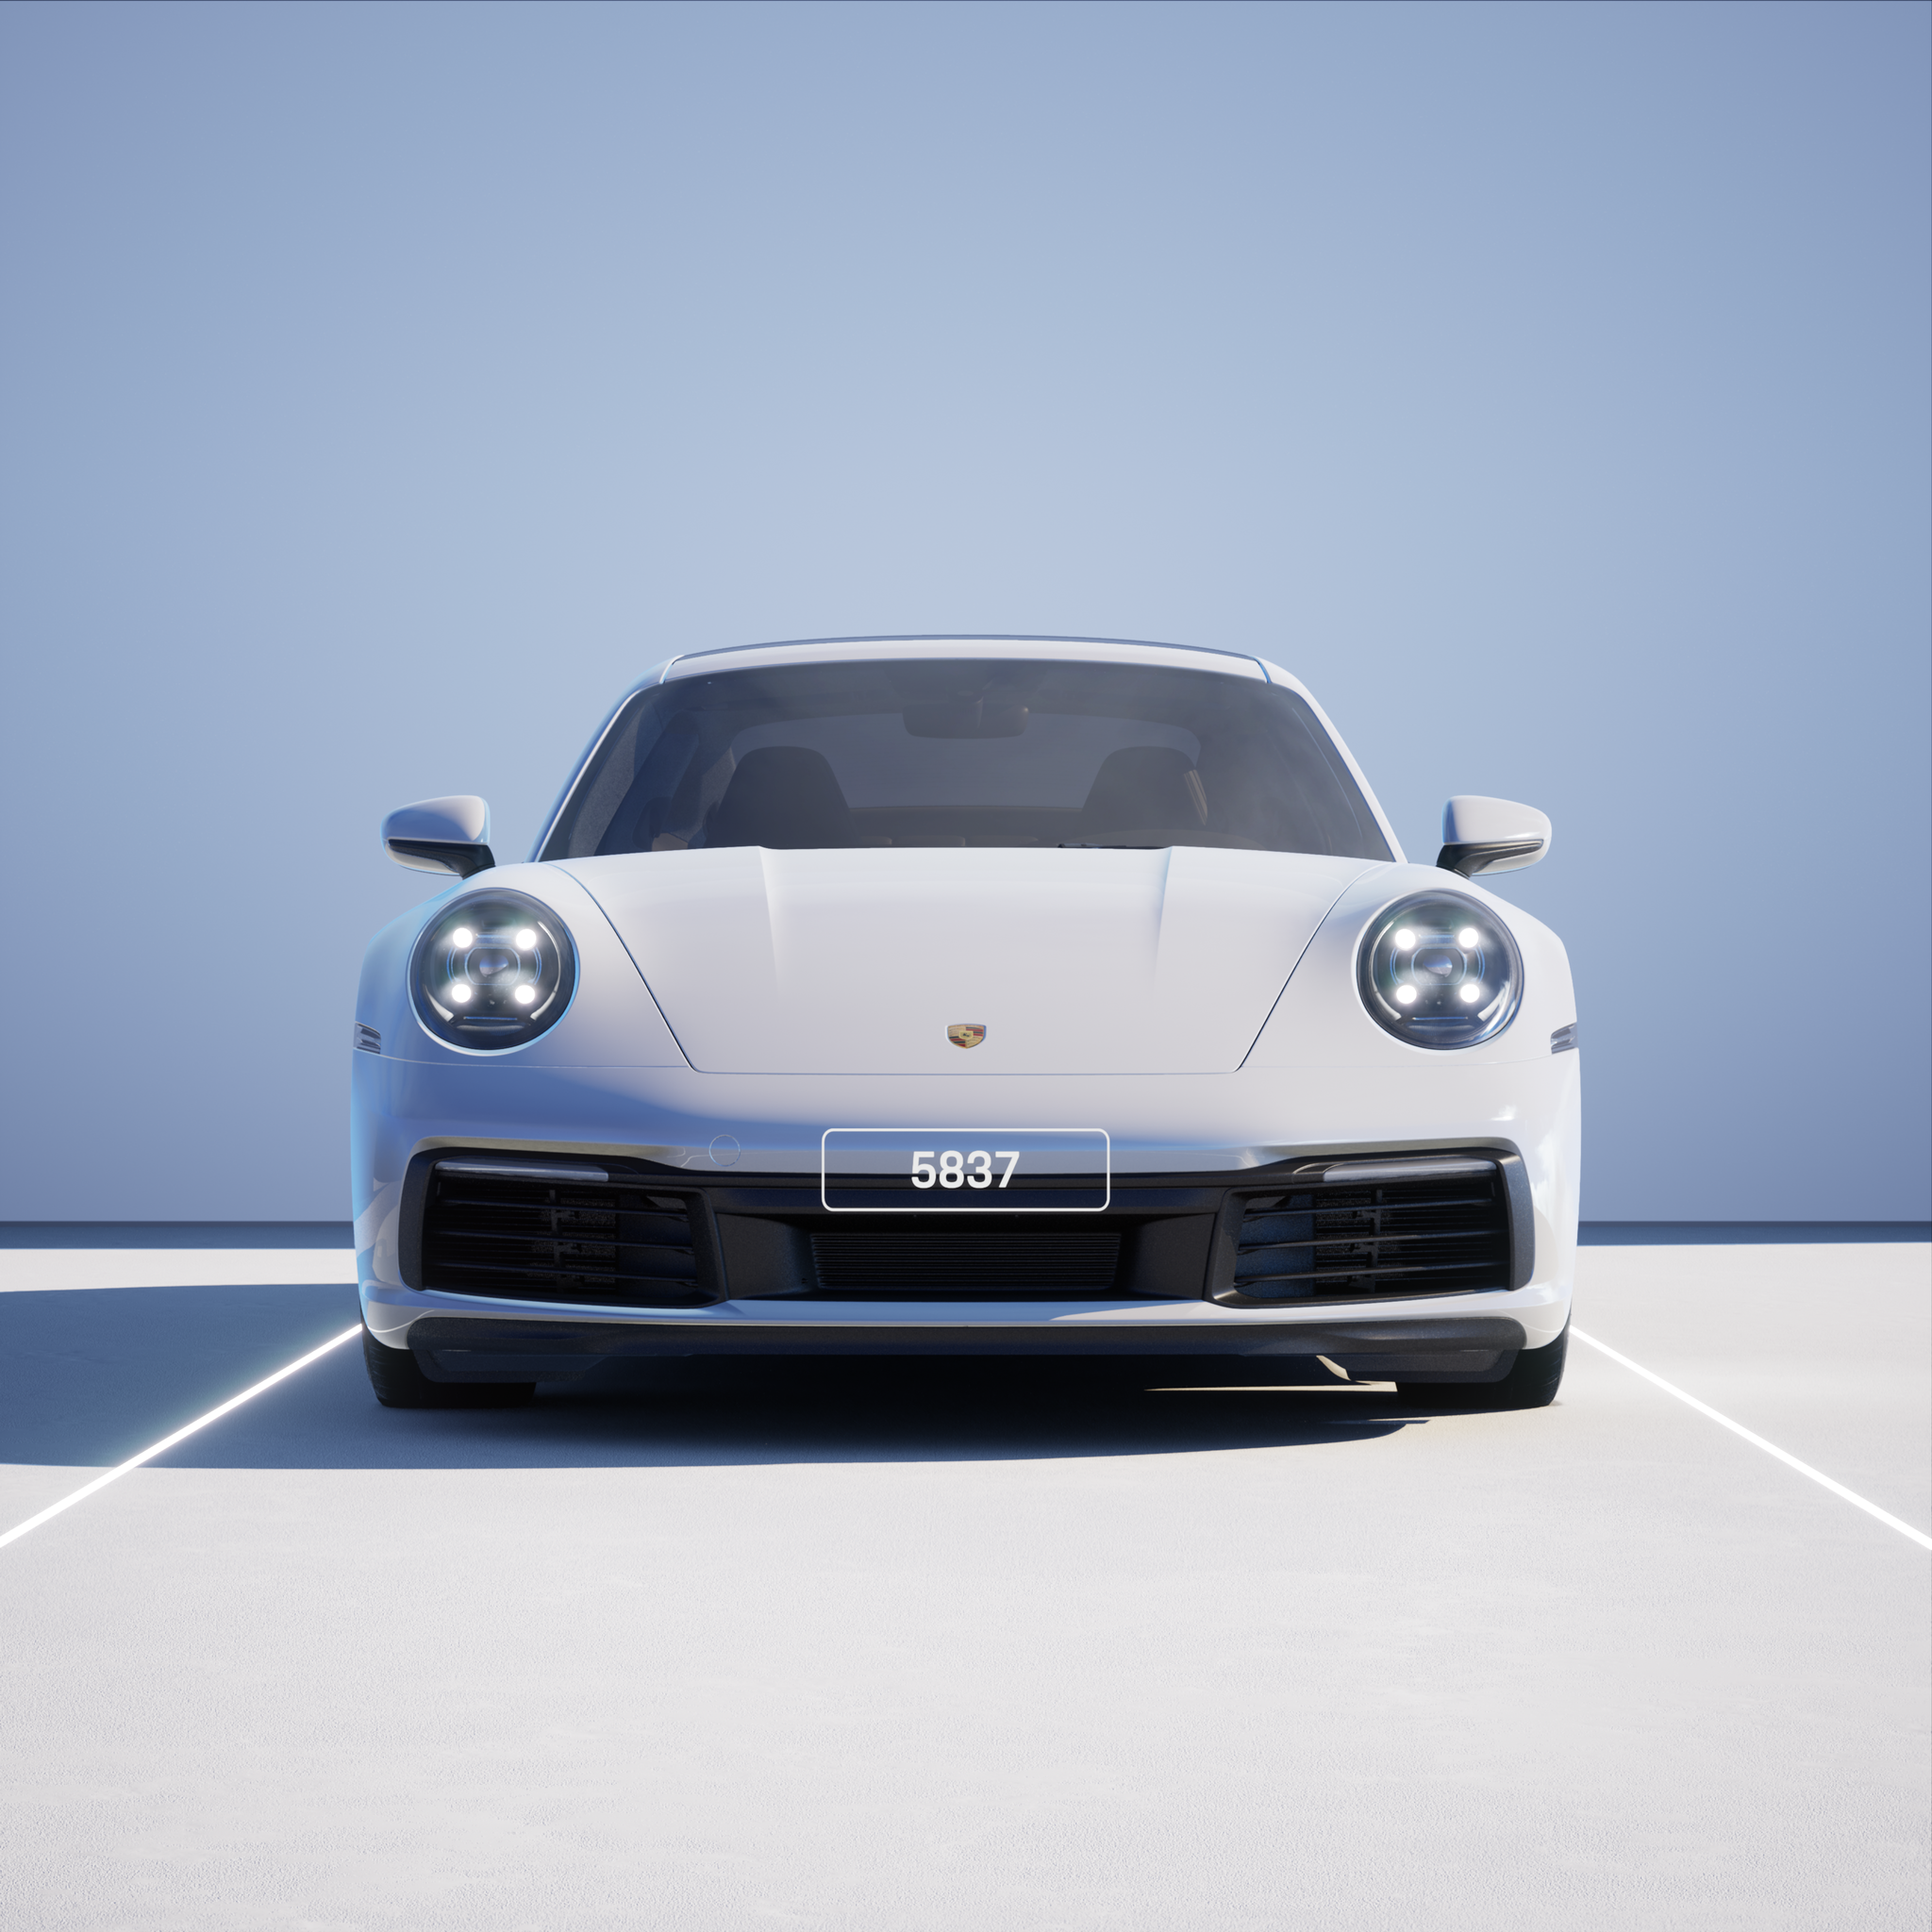 The PORSCHΞ 911 5837 image in phase